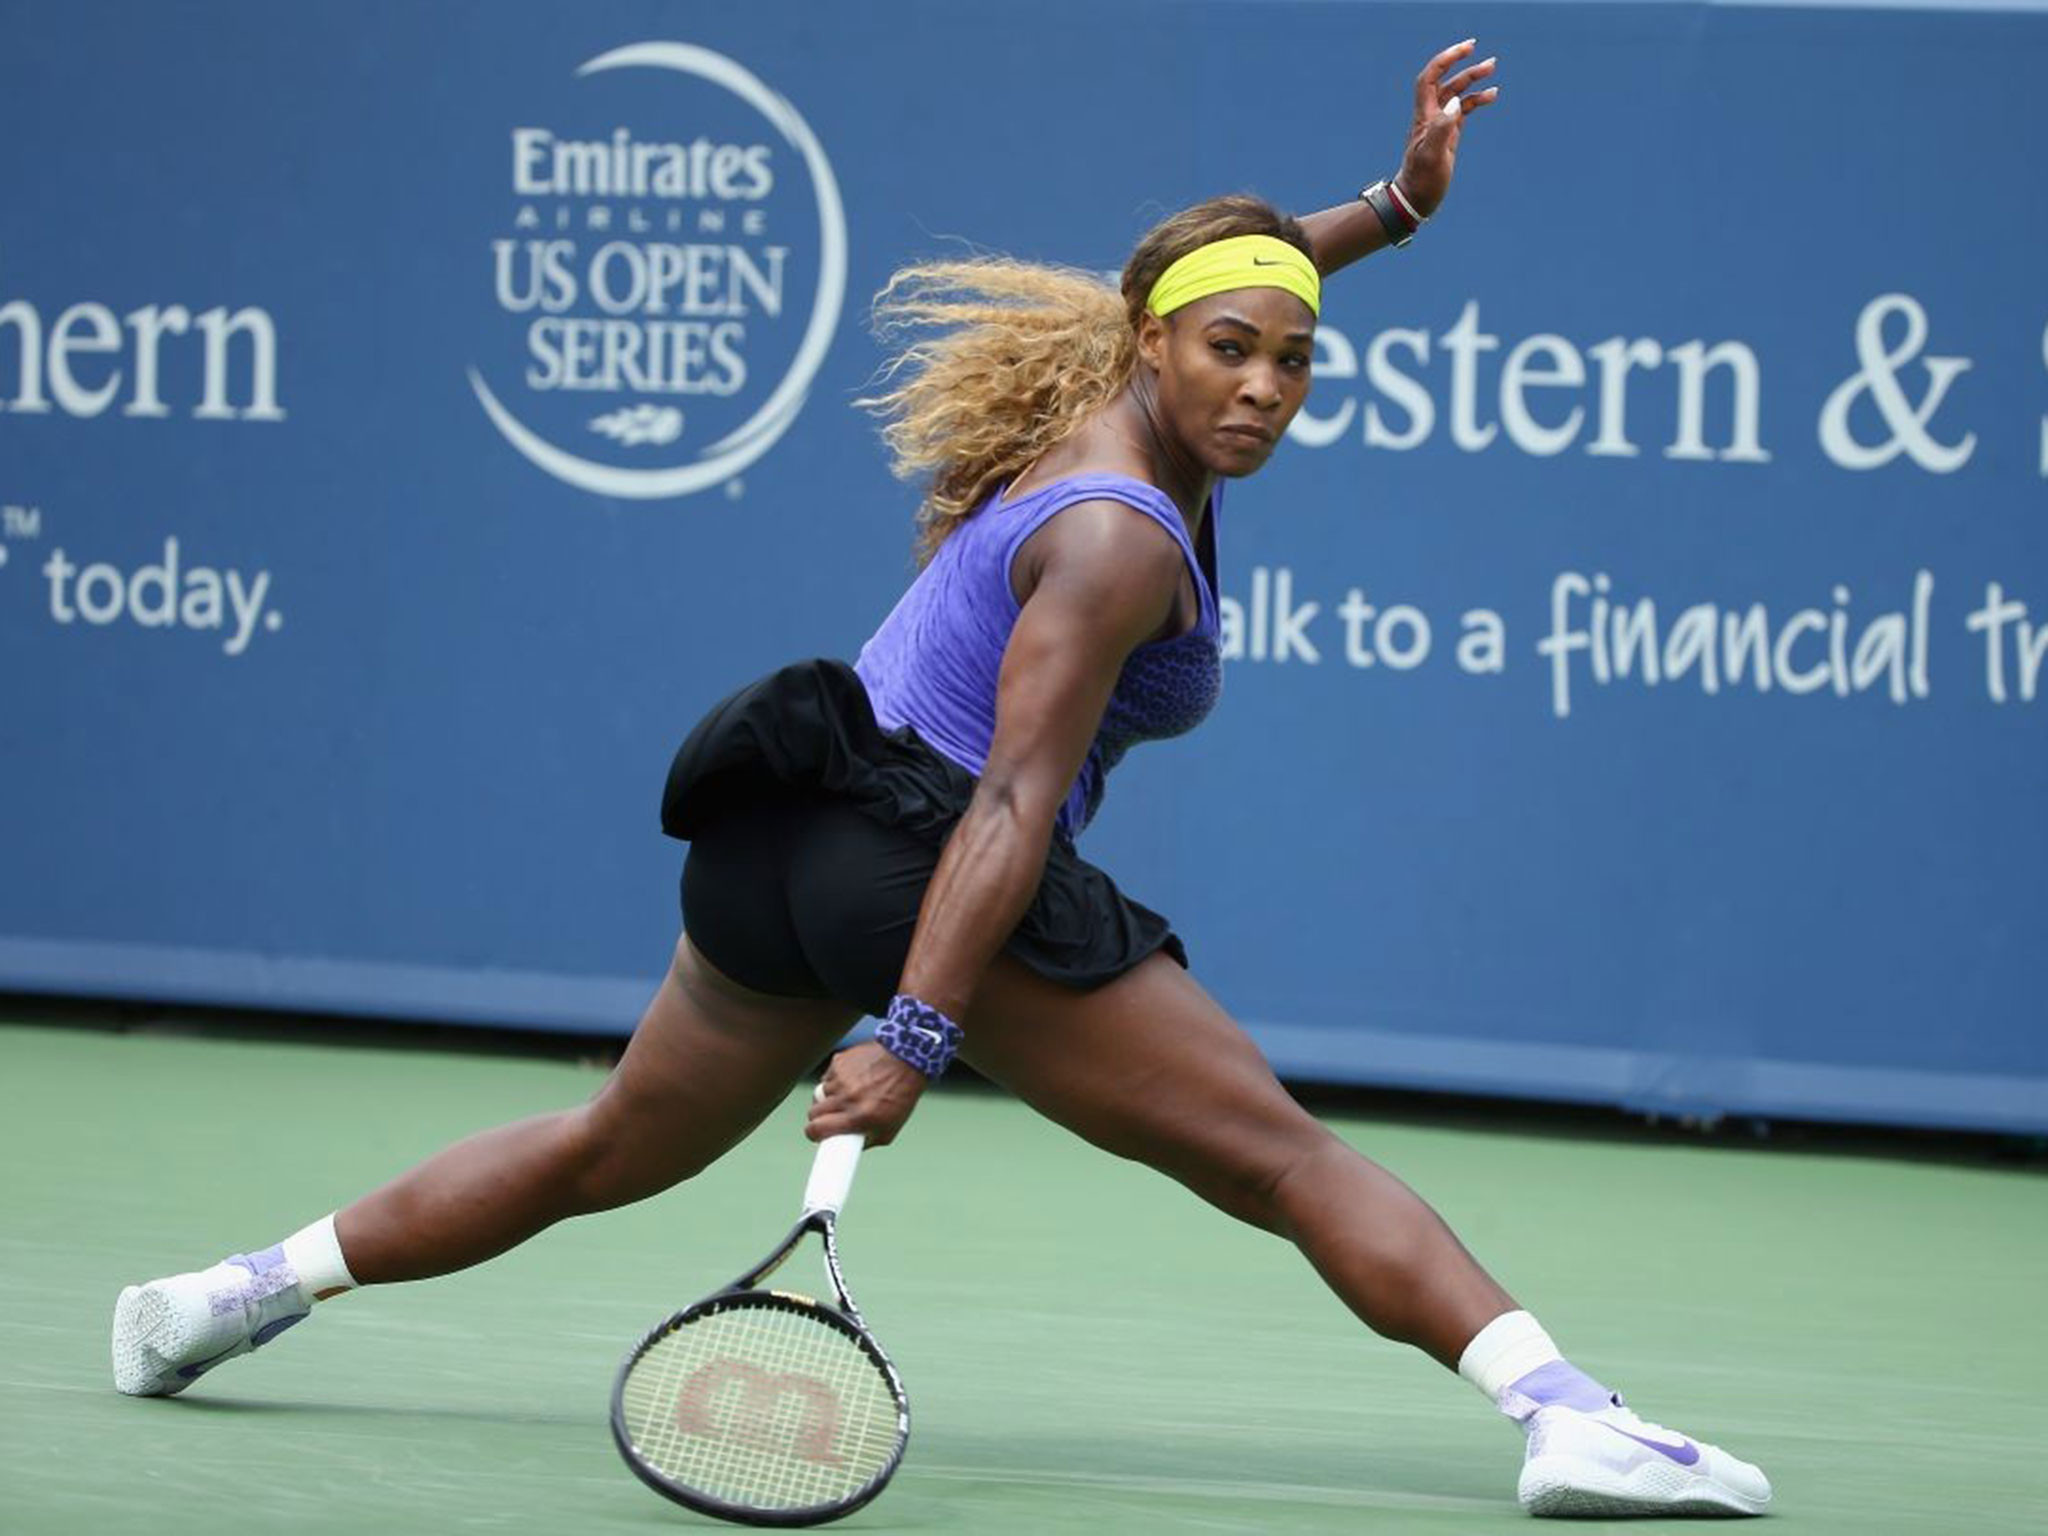 2048x1536 US Open 2014: Serena Williams forgets age and stays focused on the present  | The Independent